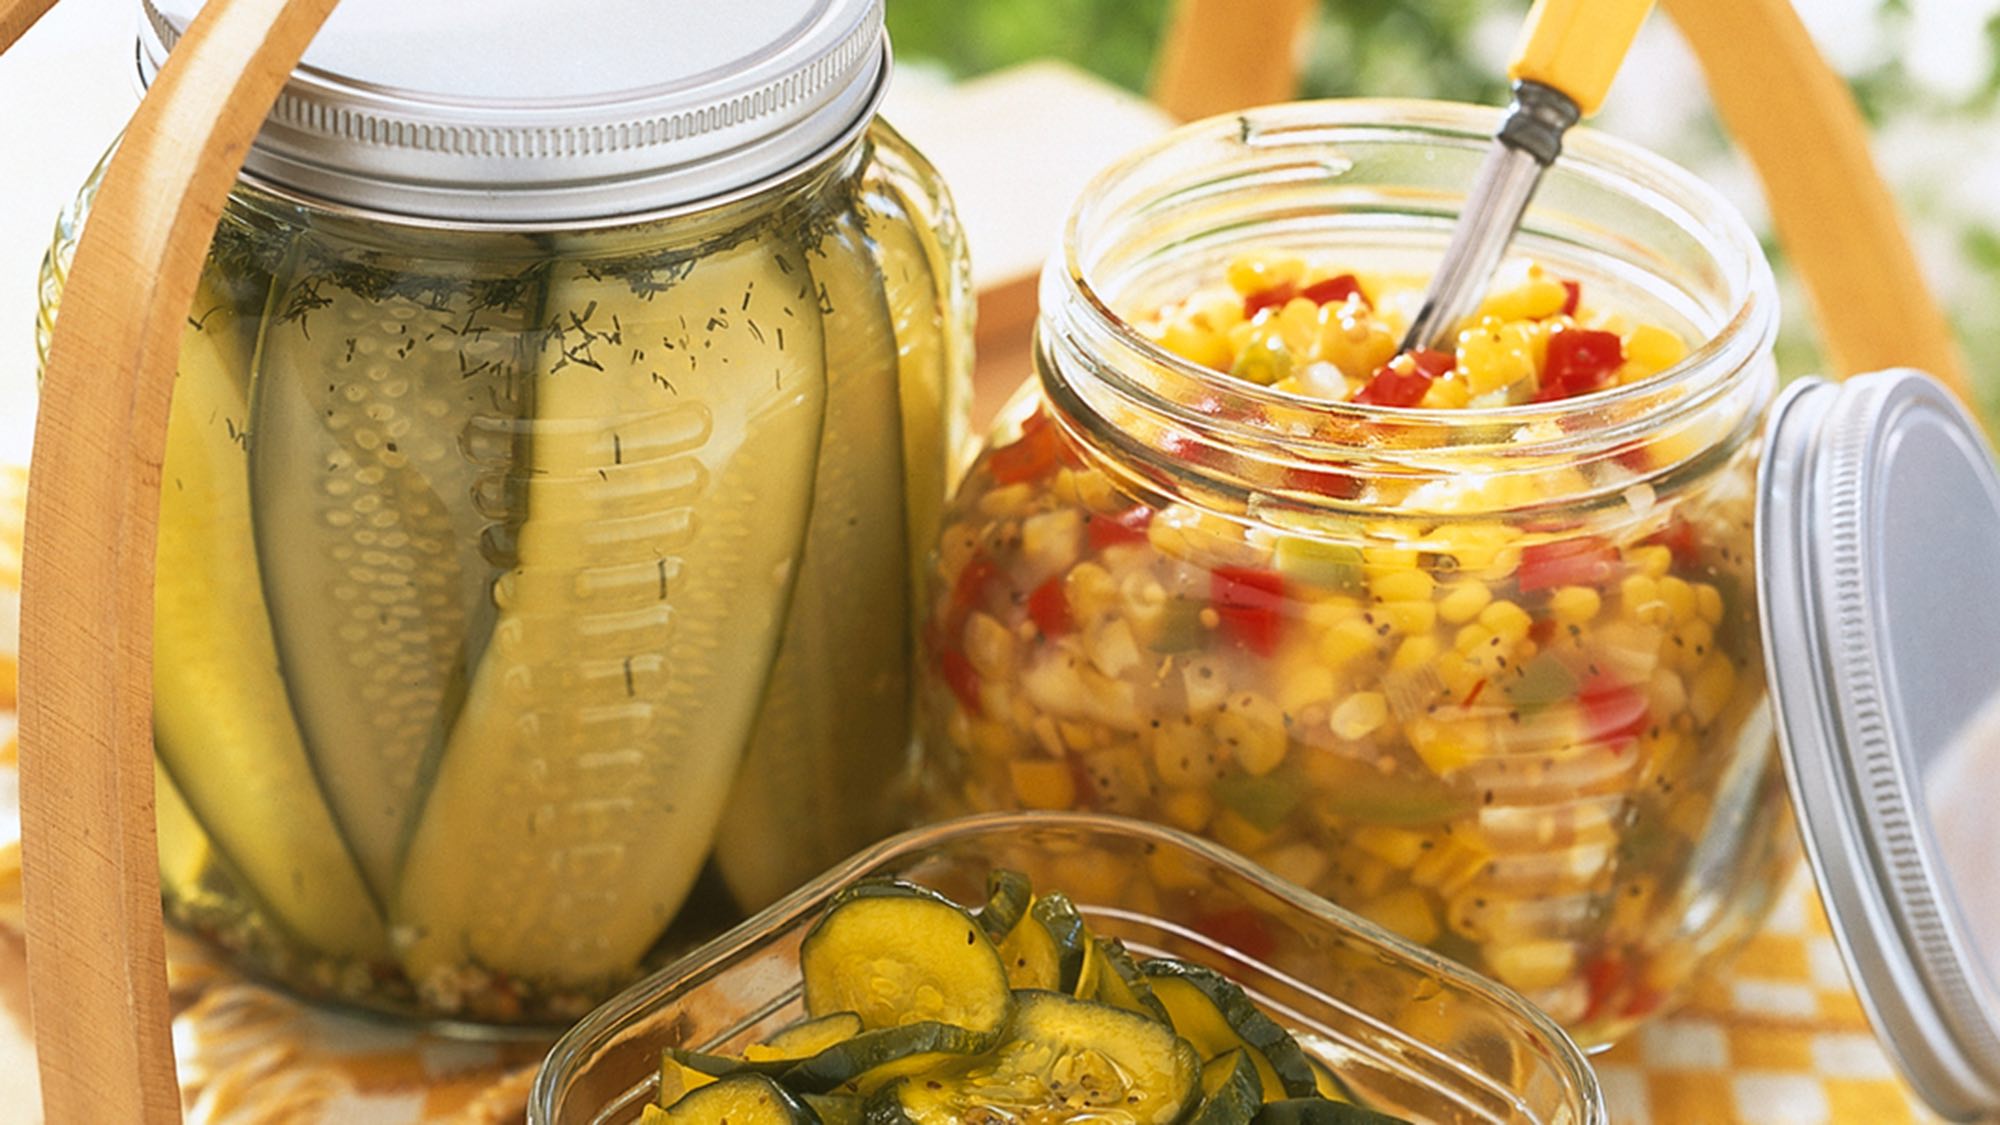 How To Make The Crunchiest Homemade Pickles Mccormick